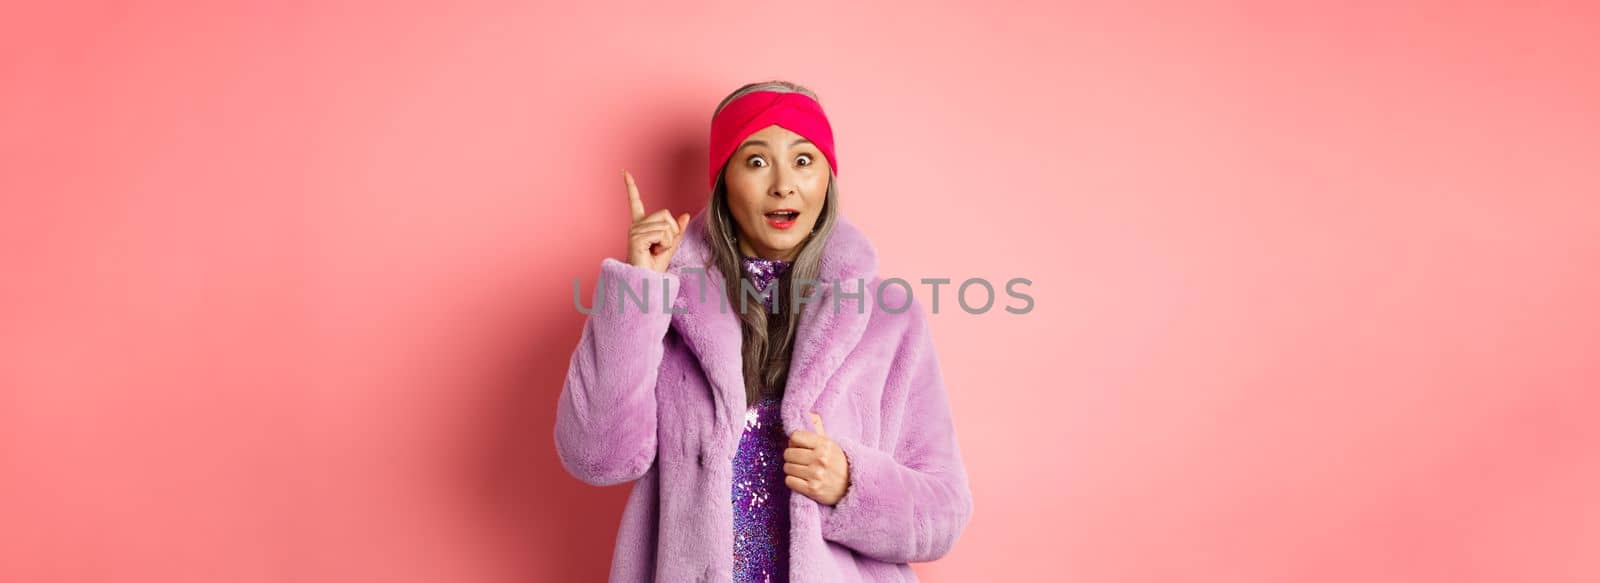 Fashion and shopping concept. Smiling elderly woman having an idea. Stylish old lady in purple fake fur coat raising index finger, suggesting plan, standing excited on pink background.